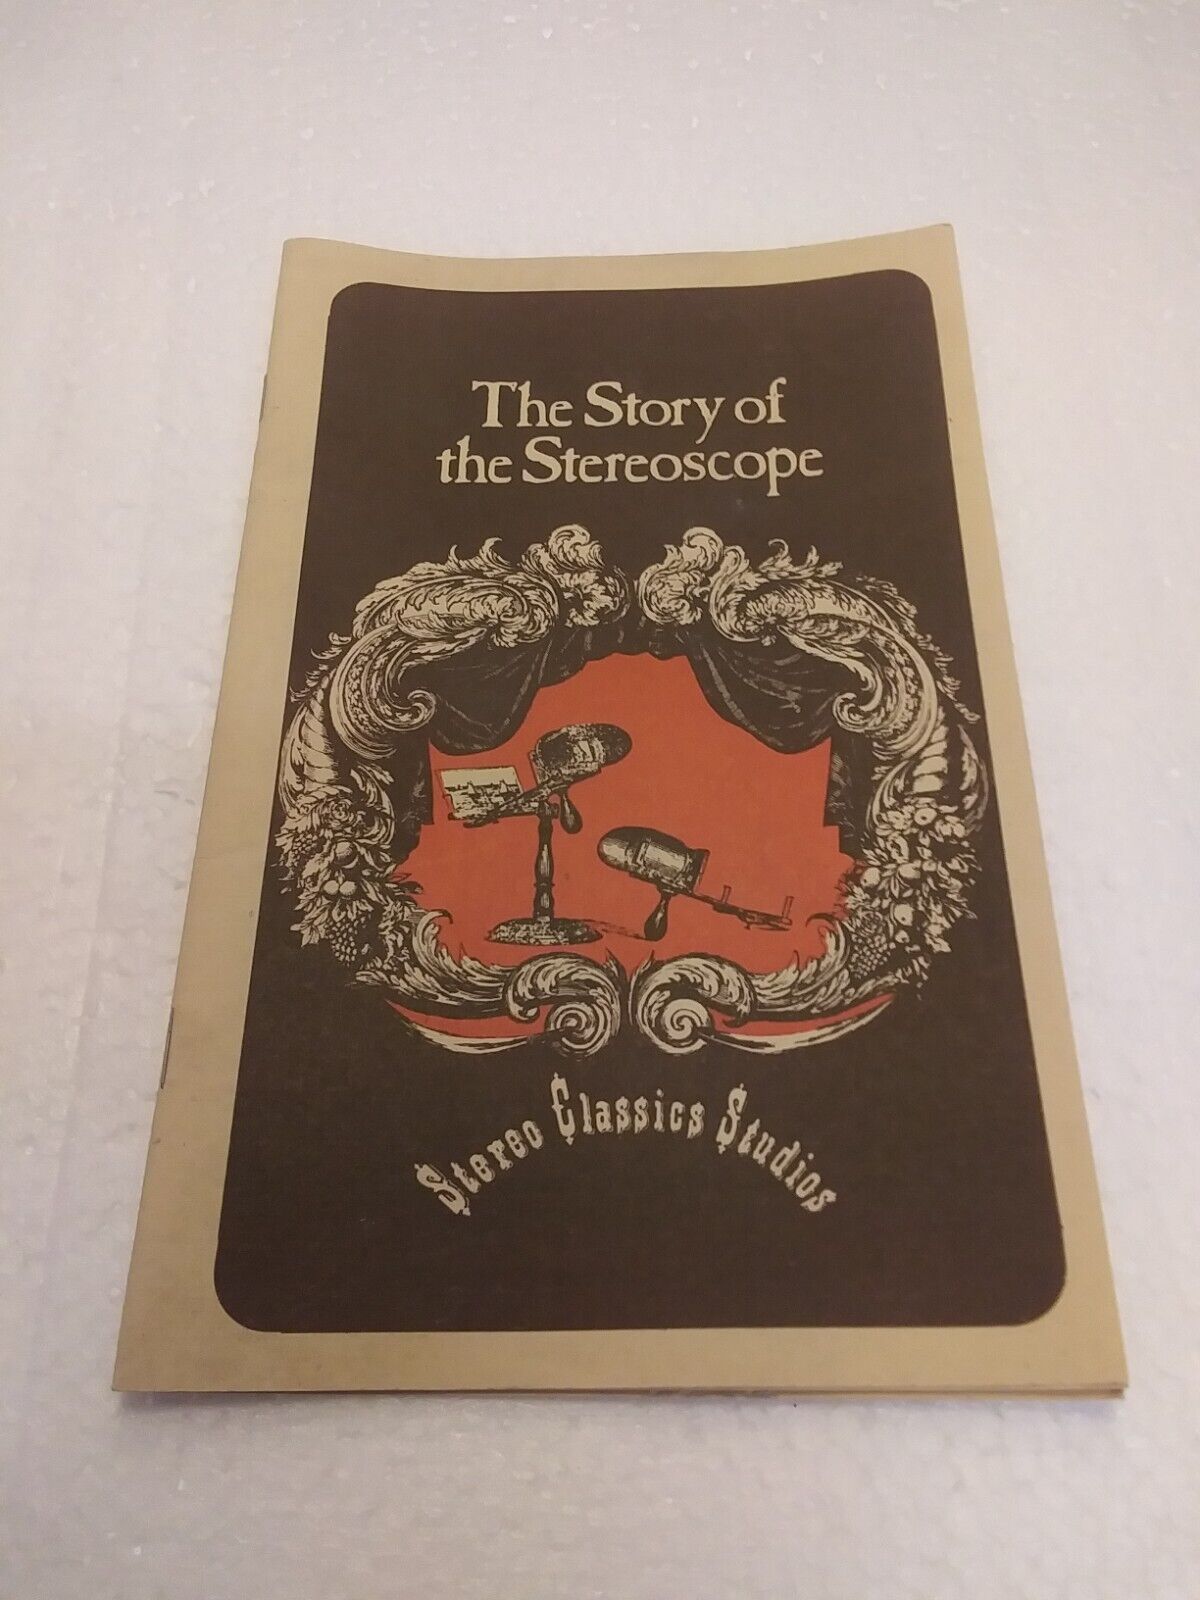 Vintage 1978 The Story Of The Stereoscope By Stereo Classic Studios Book